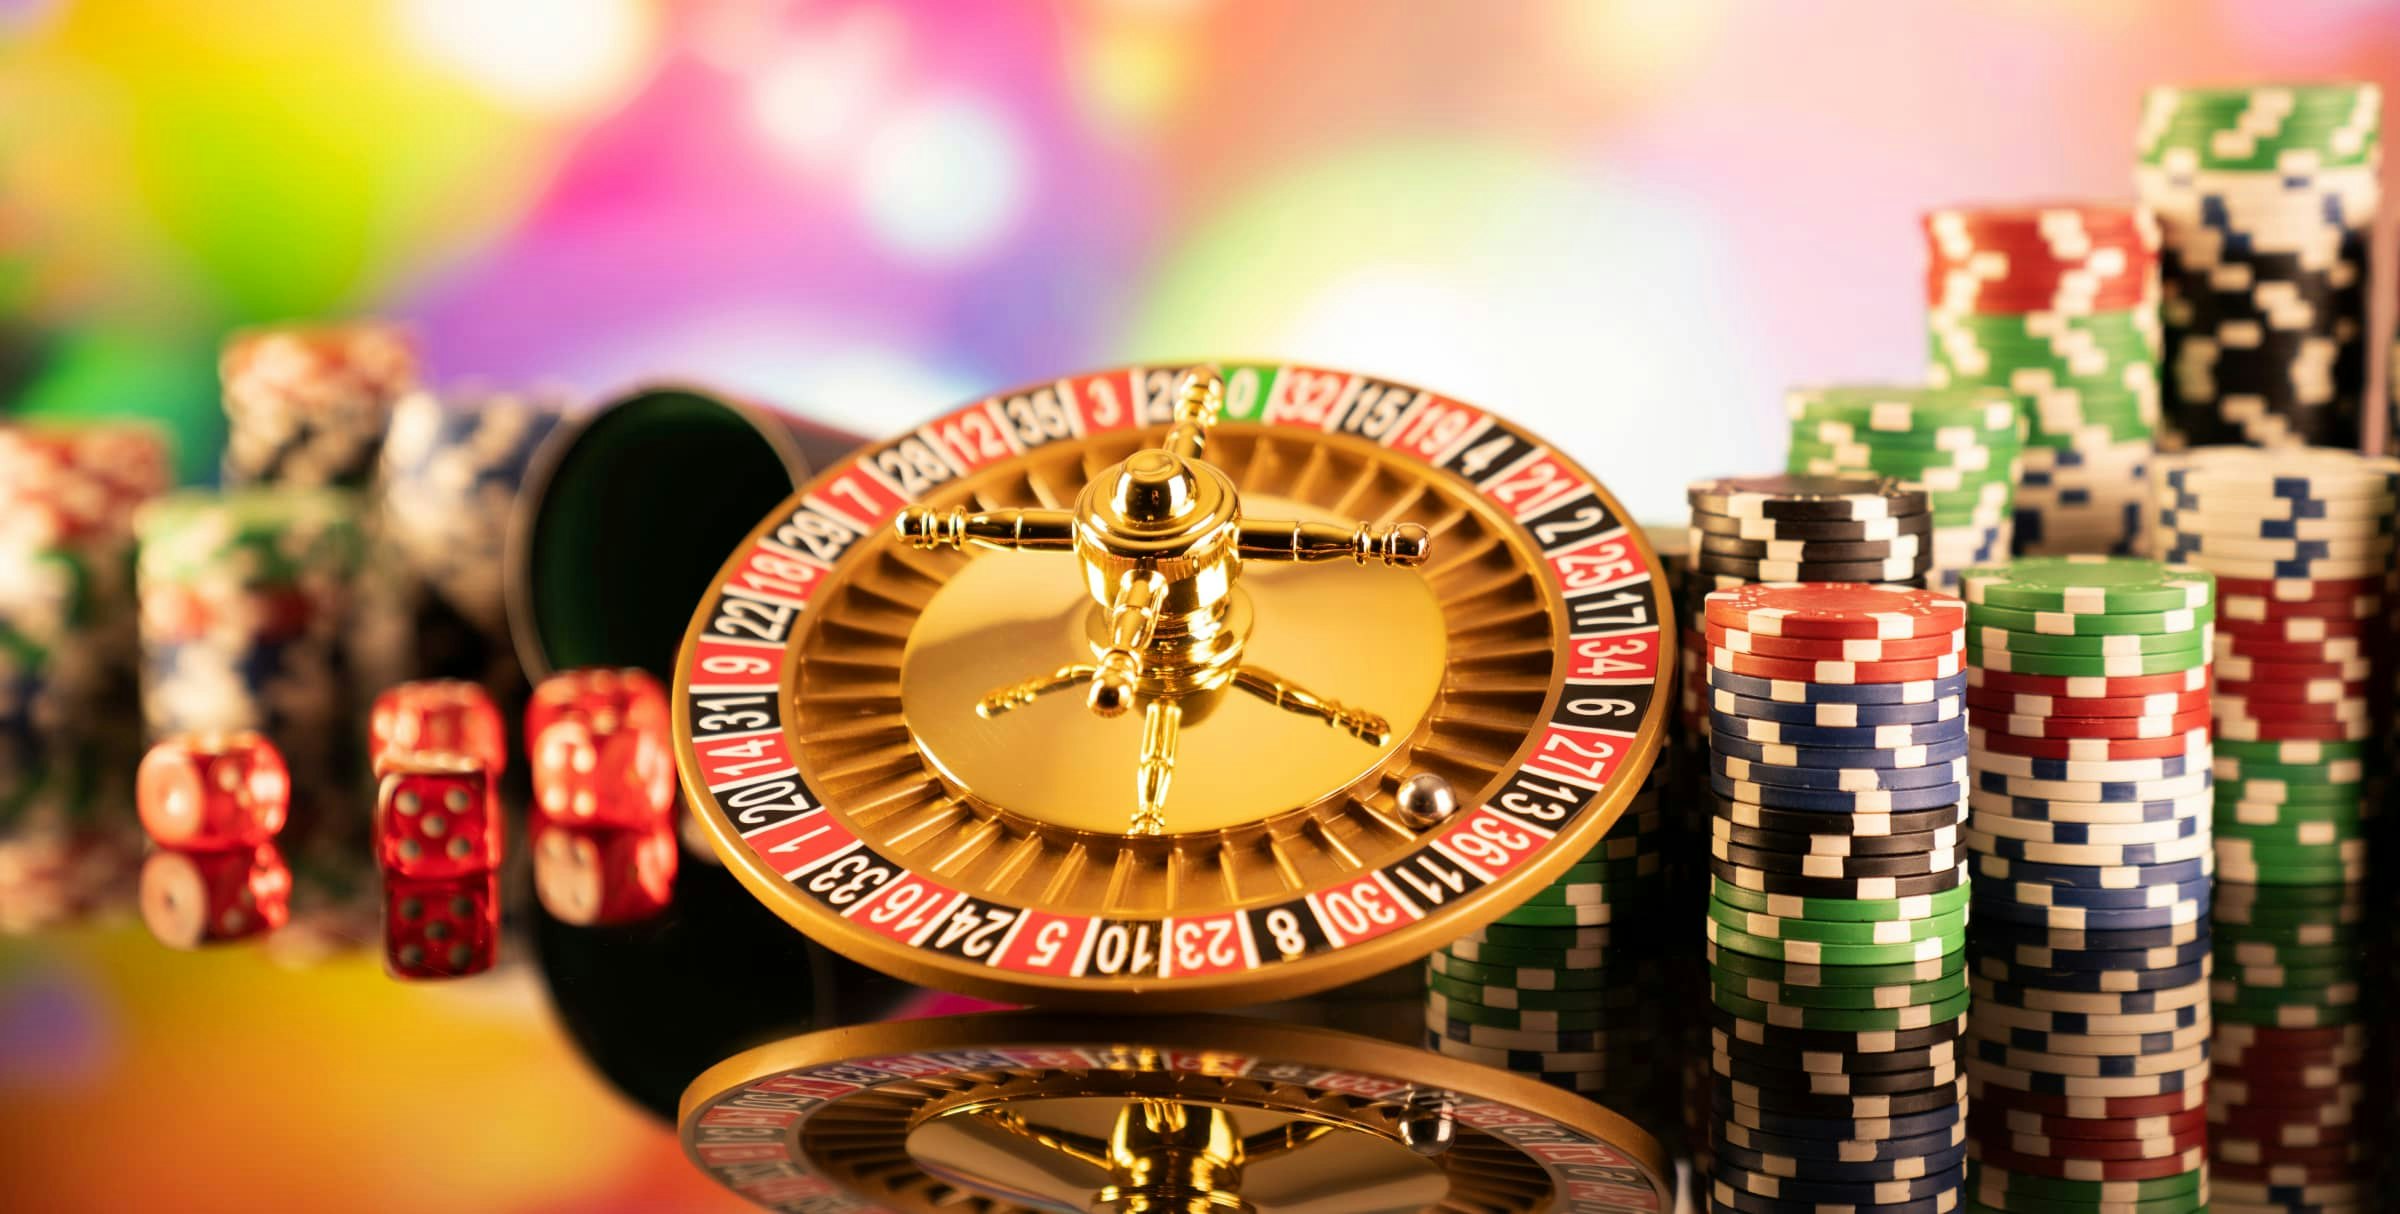 Why crypto fans love high-roller casinos